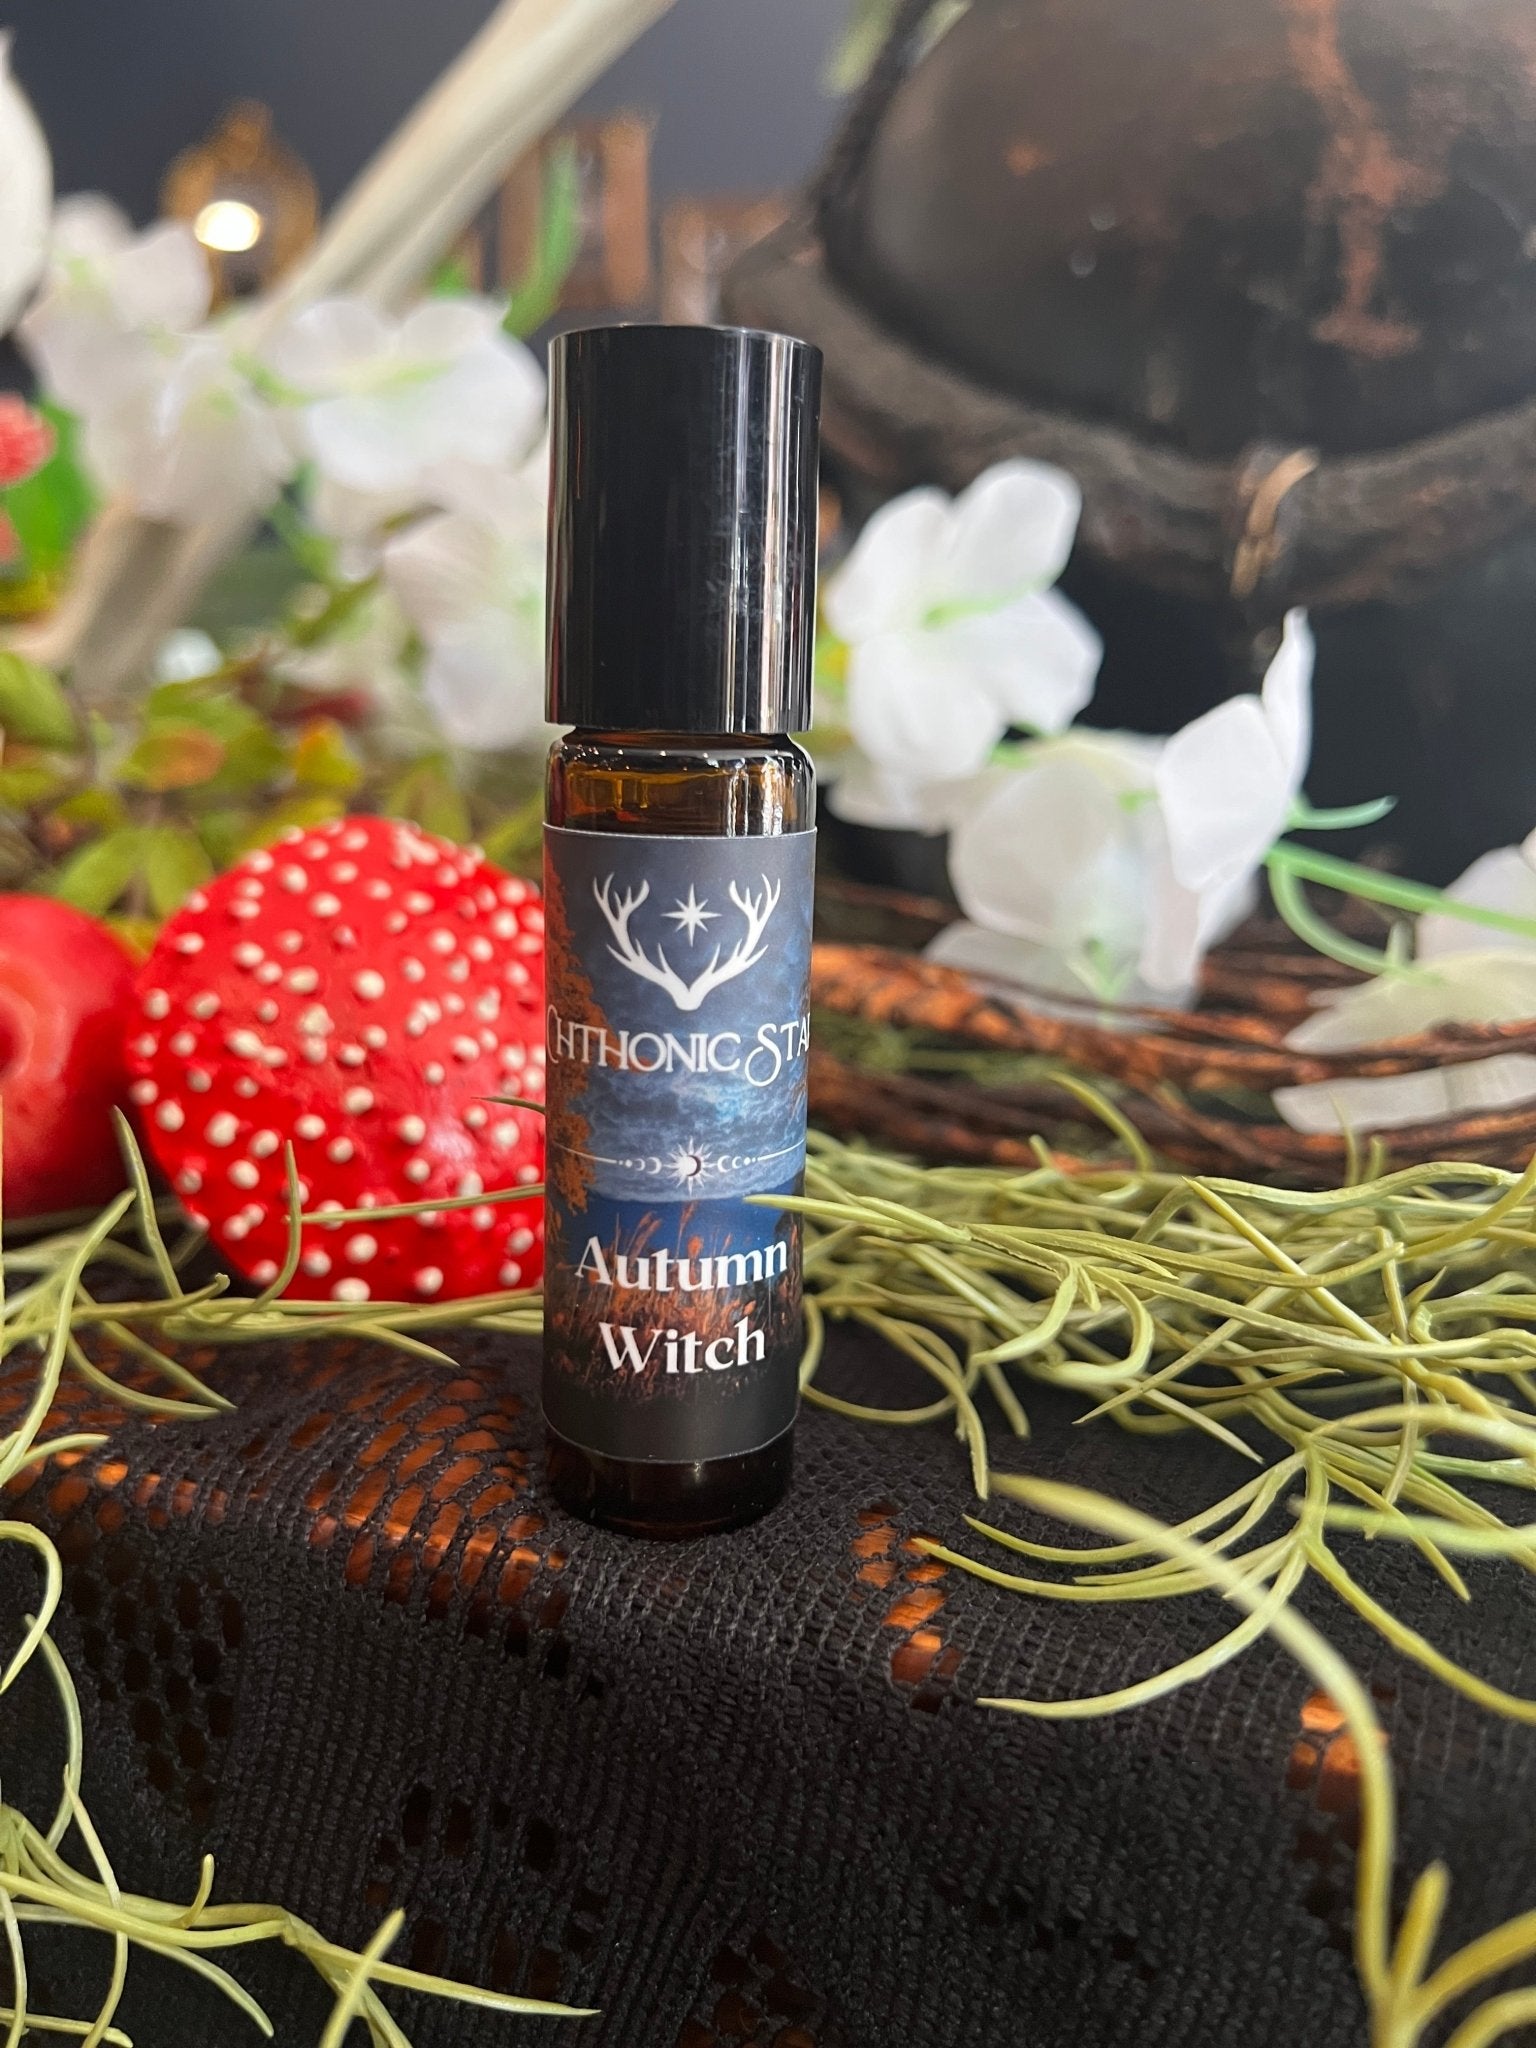 Autumn Witch - Perfume Oil Roller by Chthonic Star - Nocturne LLC